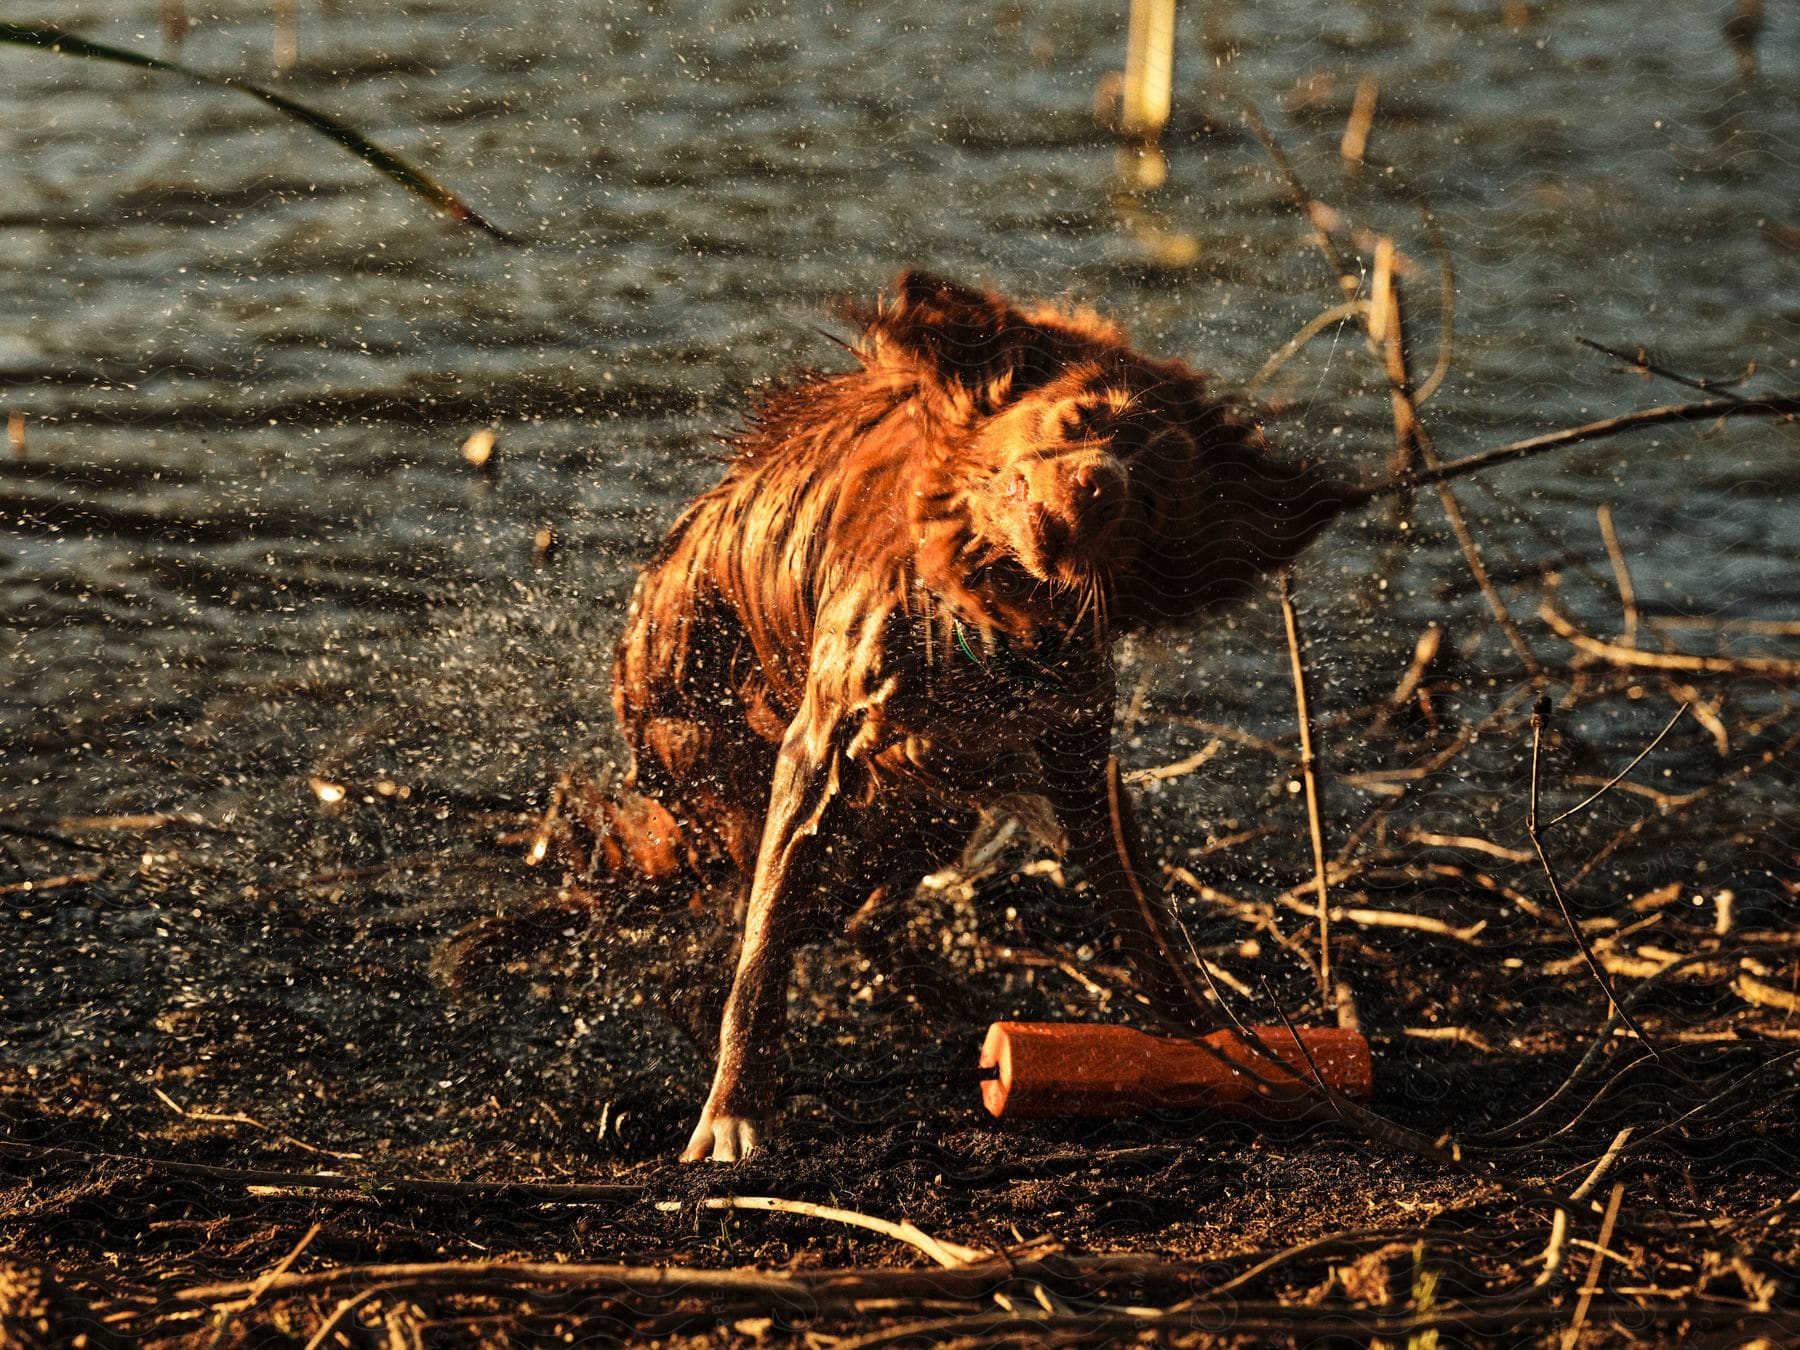 Joyful dog sprays water droplets from its fur on a stick-strewn riverbank, its toy held playfully below.